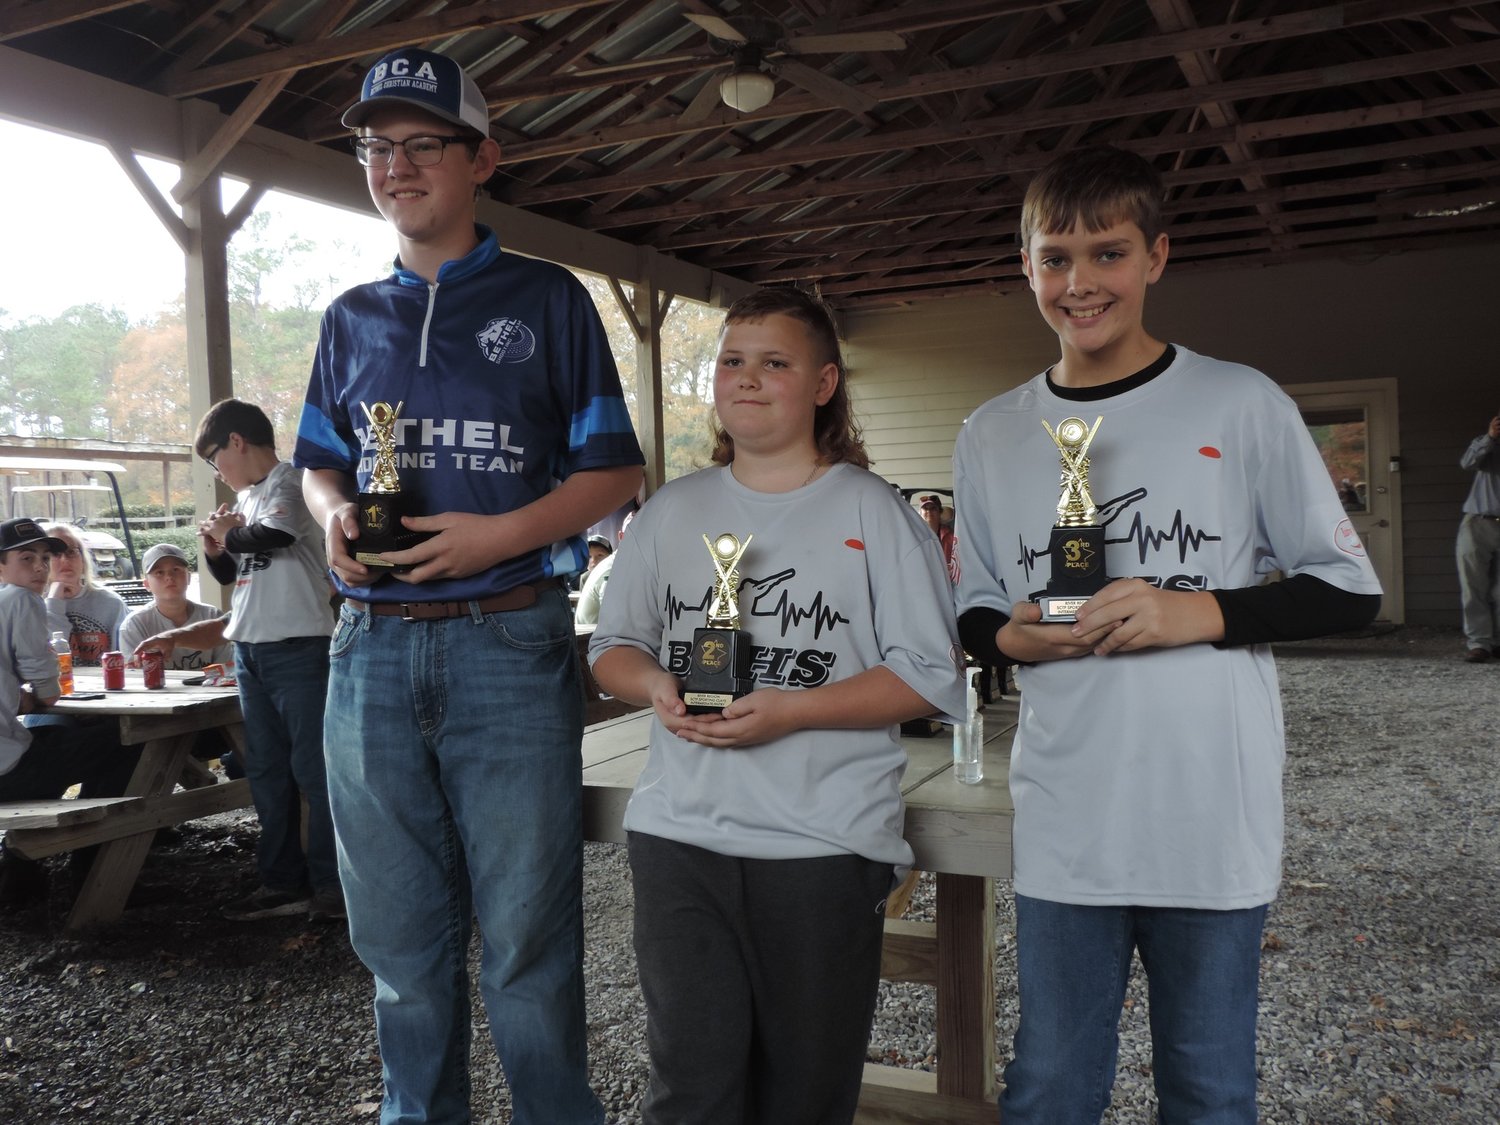 BCHS Sporting Clays team members finished in second and third place in the Intermediate Entry. The top three included, from left, first place, Jake Spann (Bethel); second place, Corbin Crysell (BCHS); and third place, Brennan Parker (BCHS).